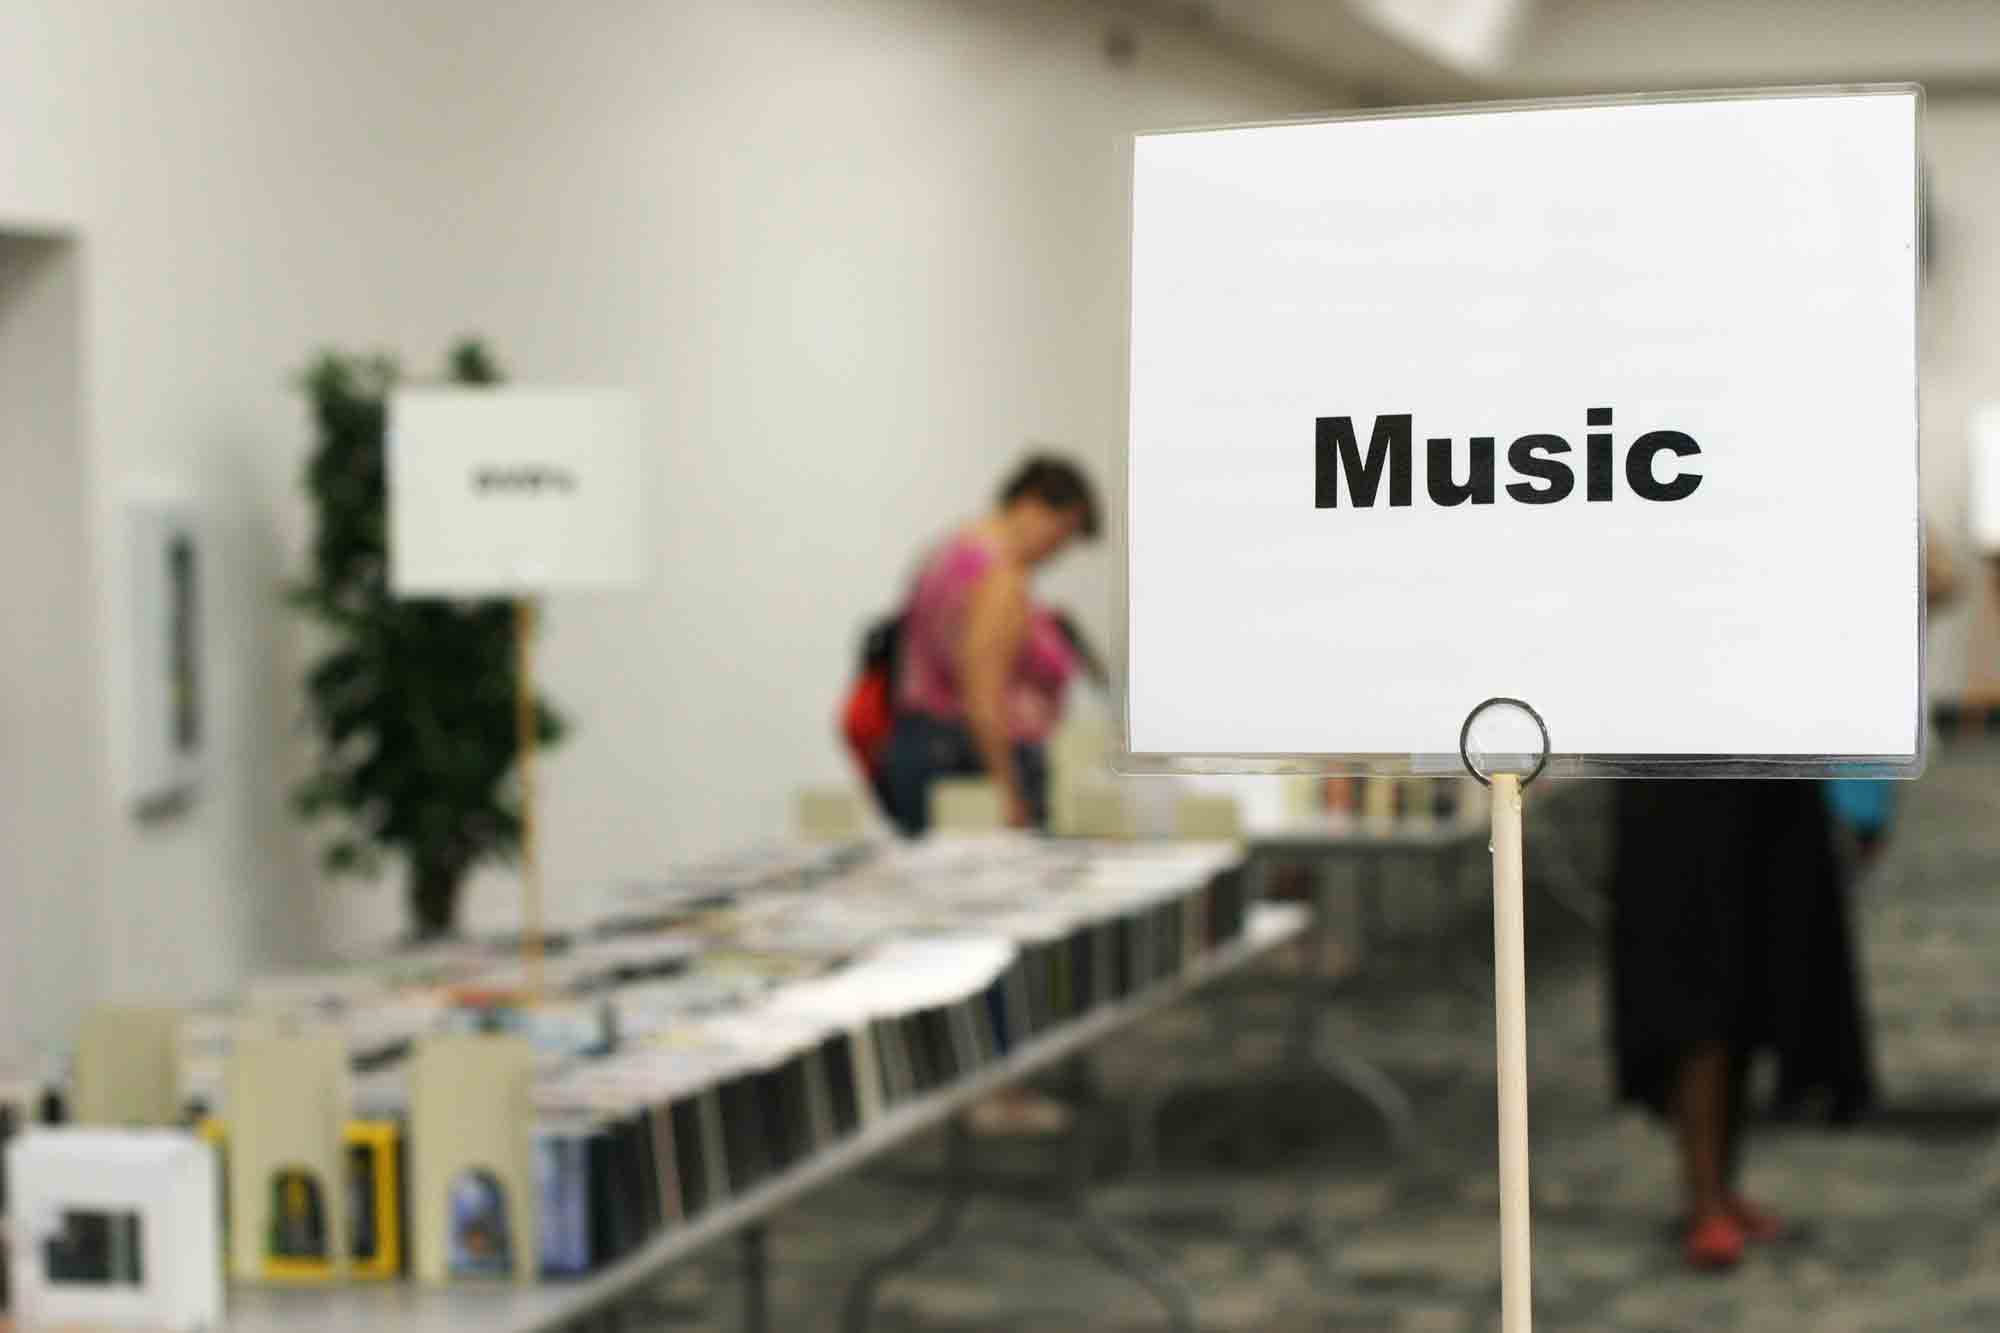 Sign reading "Music" with book sale patrons in the background